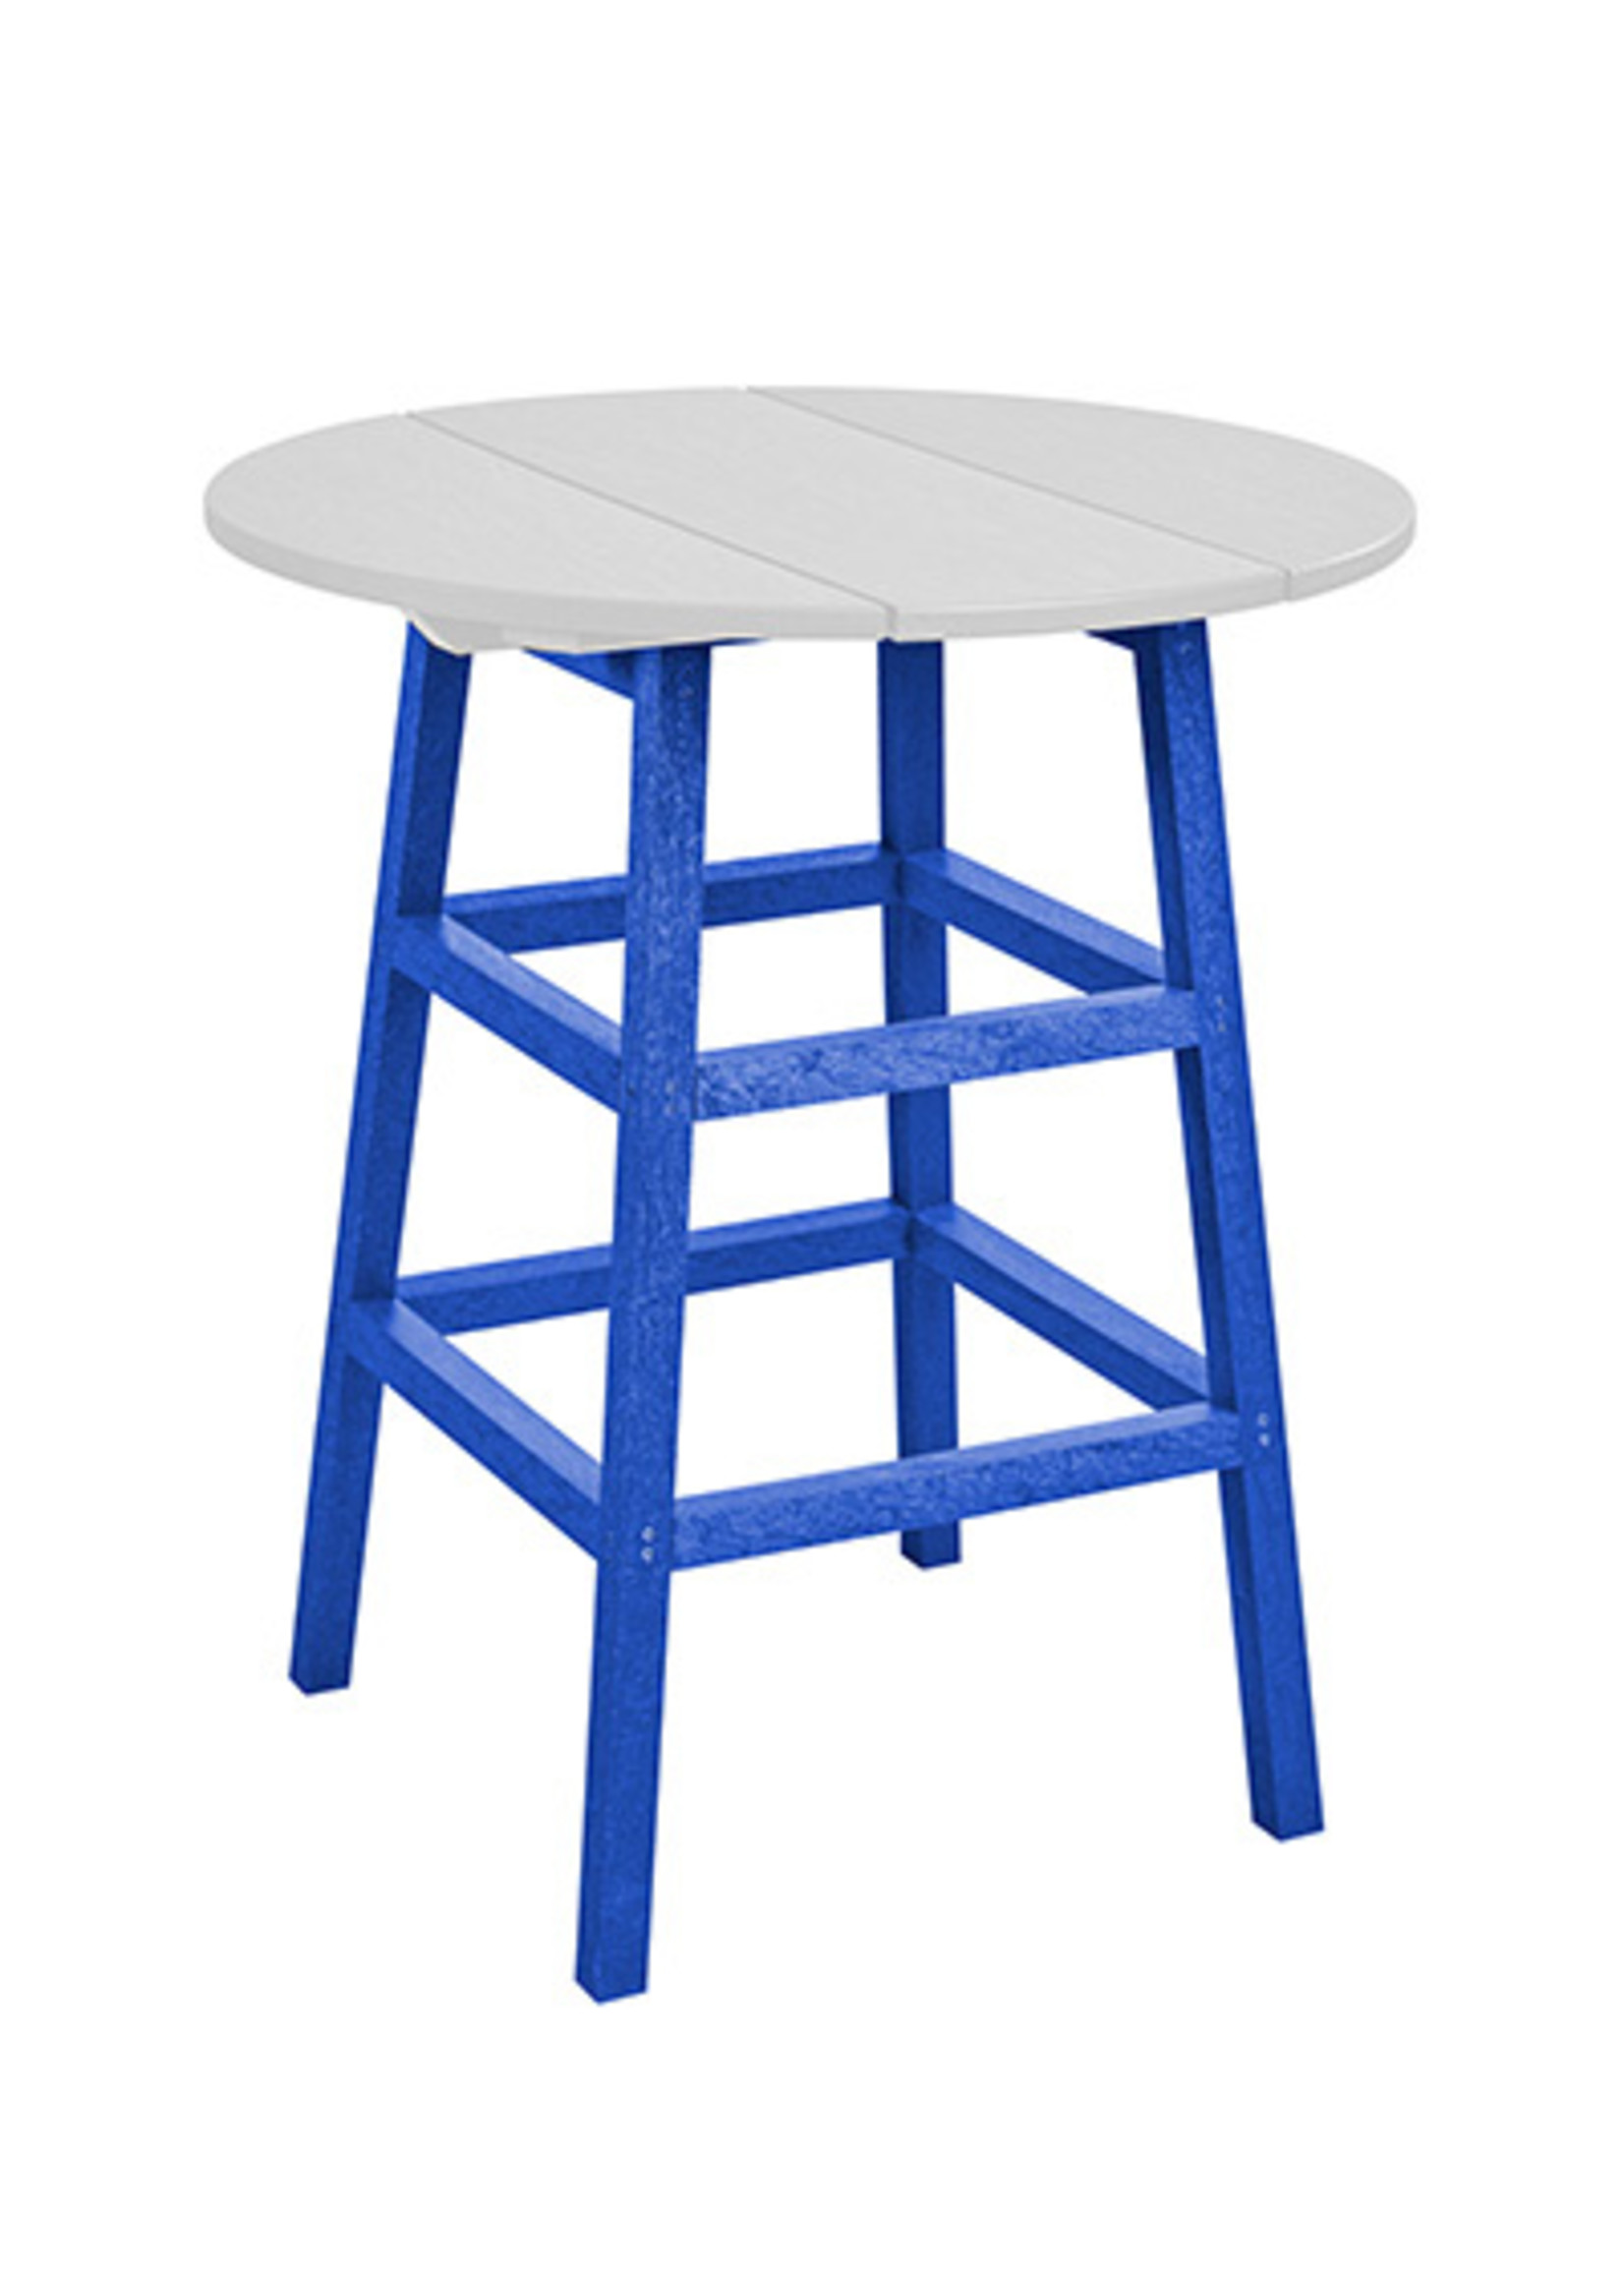 C.R. Plastic Products Counter Table Legs